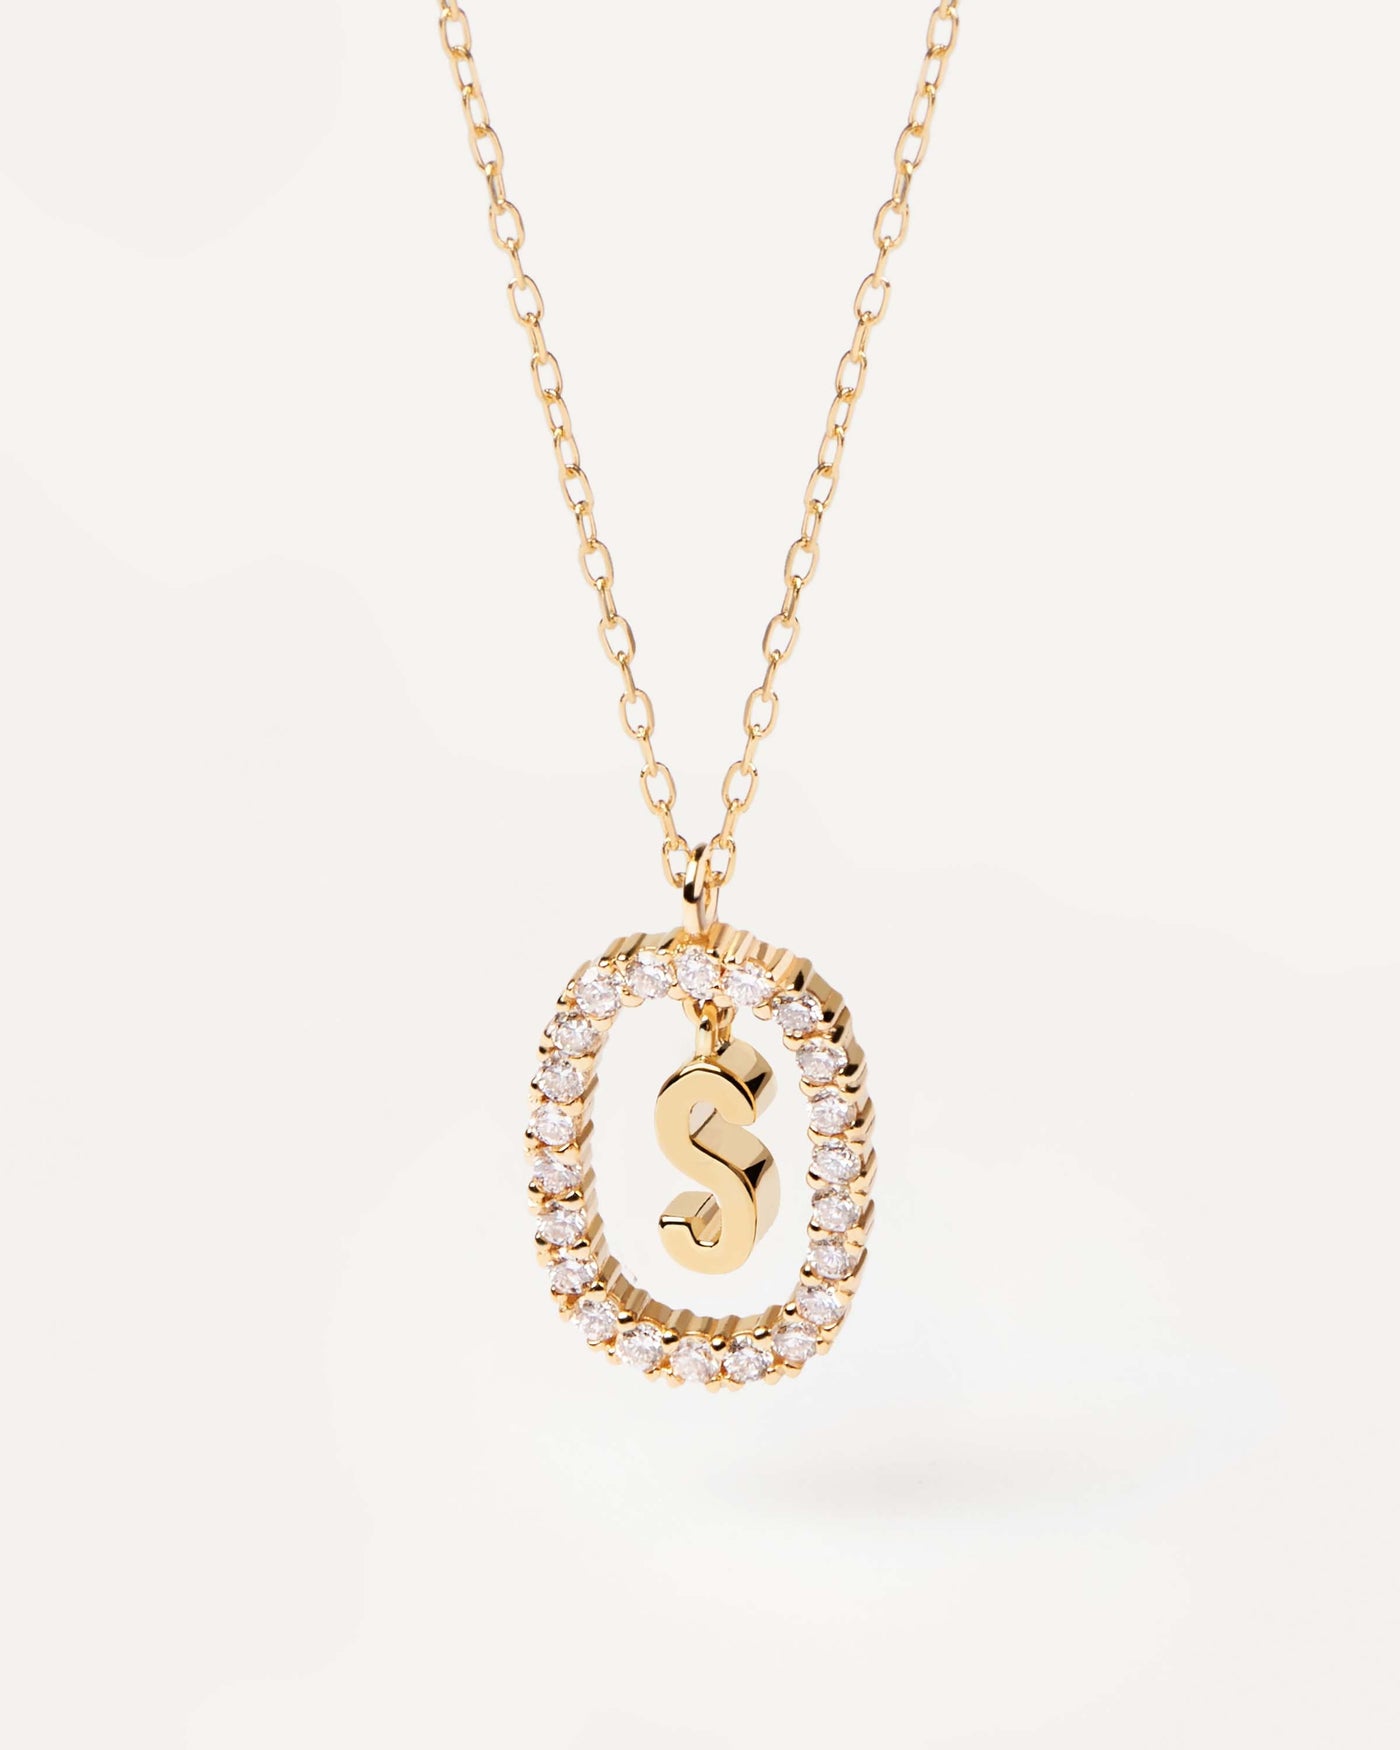 2024 Selection | Diamonds and Gold Letter S Necklace. Initial S necklace in solid yellow gold, circled by 0.33 carats lab-grown diamonds. Get the latest arrival from PDPAOLA. Place your order safely and get this Best Seller. Free Shipping.